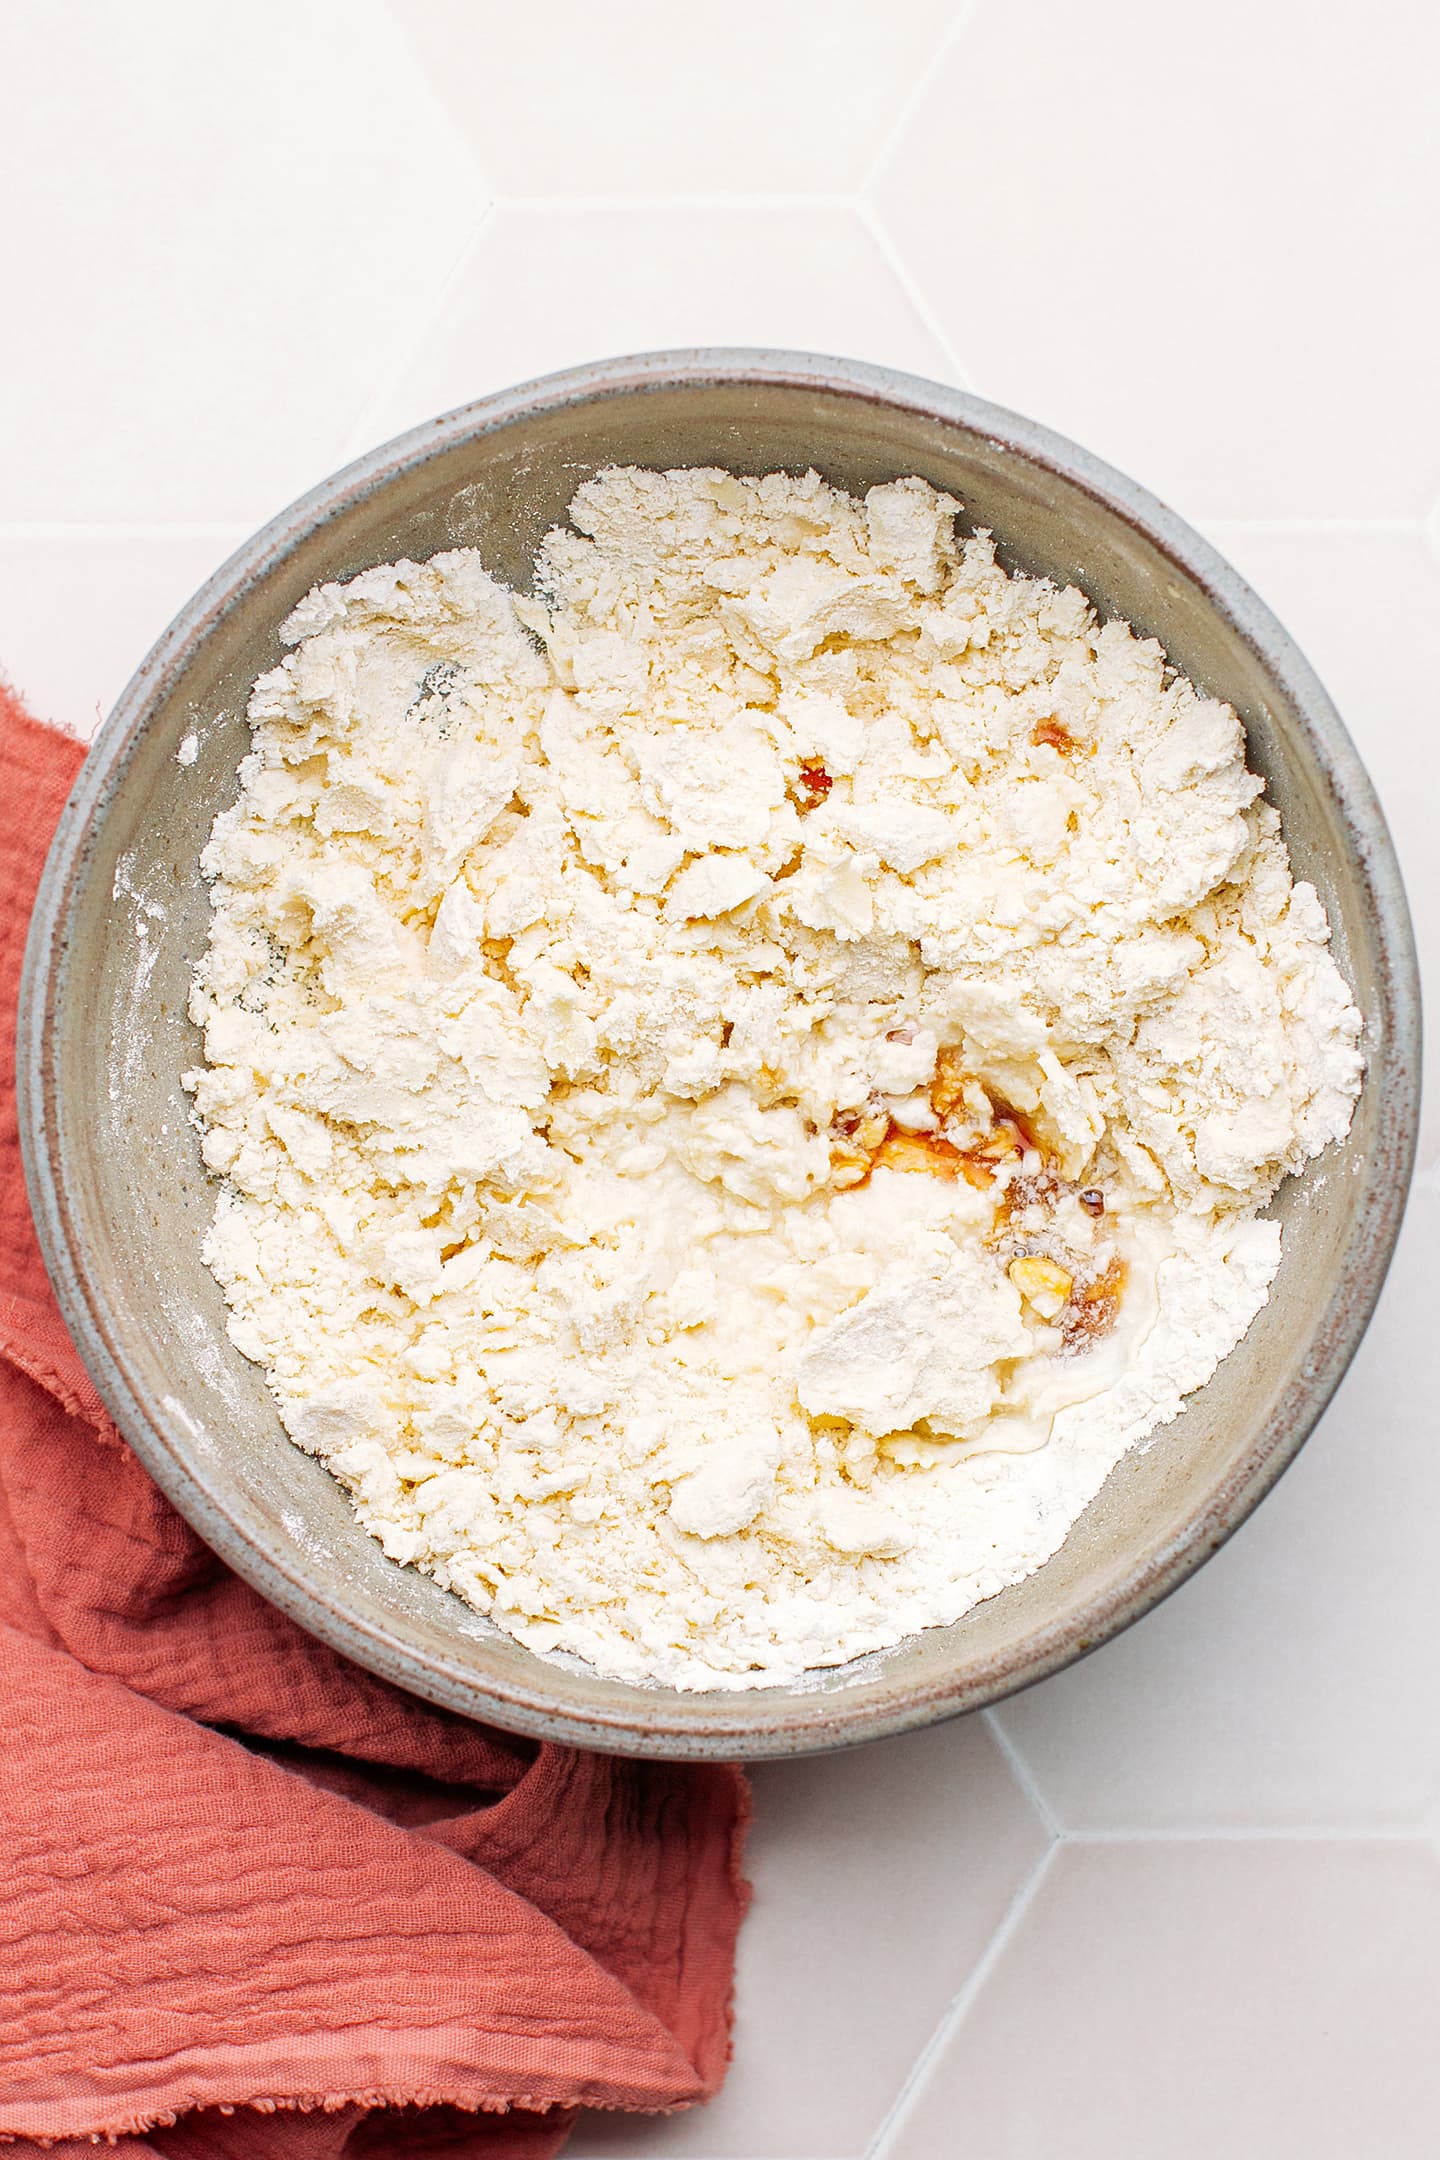 Flour, water, and butter in a mixing bowl.